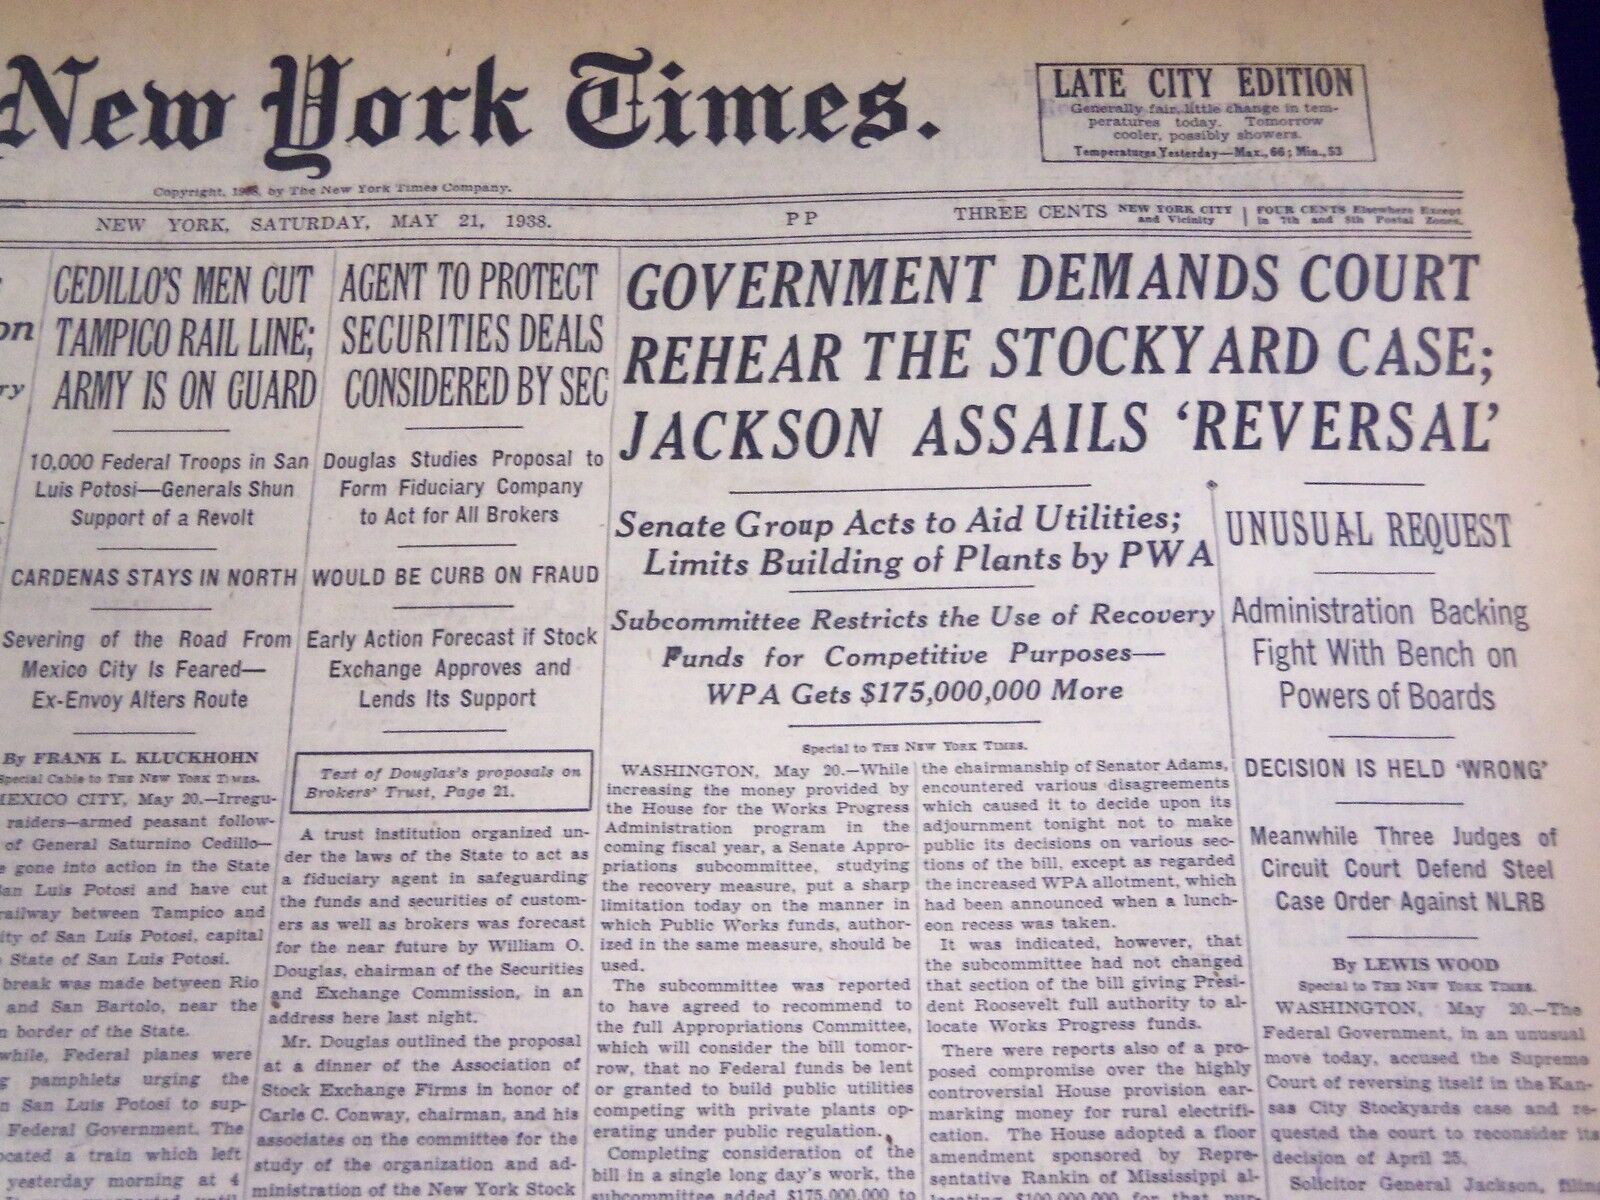 1938 MAY 21 NEW YORK TIMES - GOVERNMENT DEMANDS COURT REHEAR STOCKYARD - NT 686